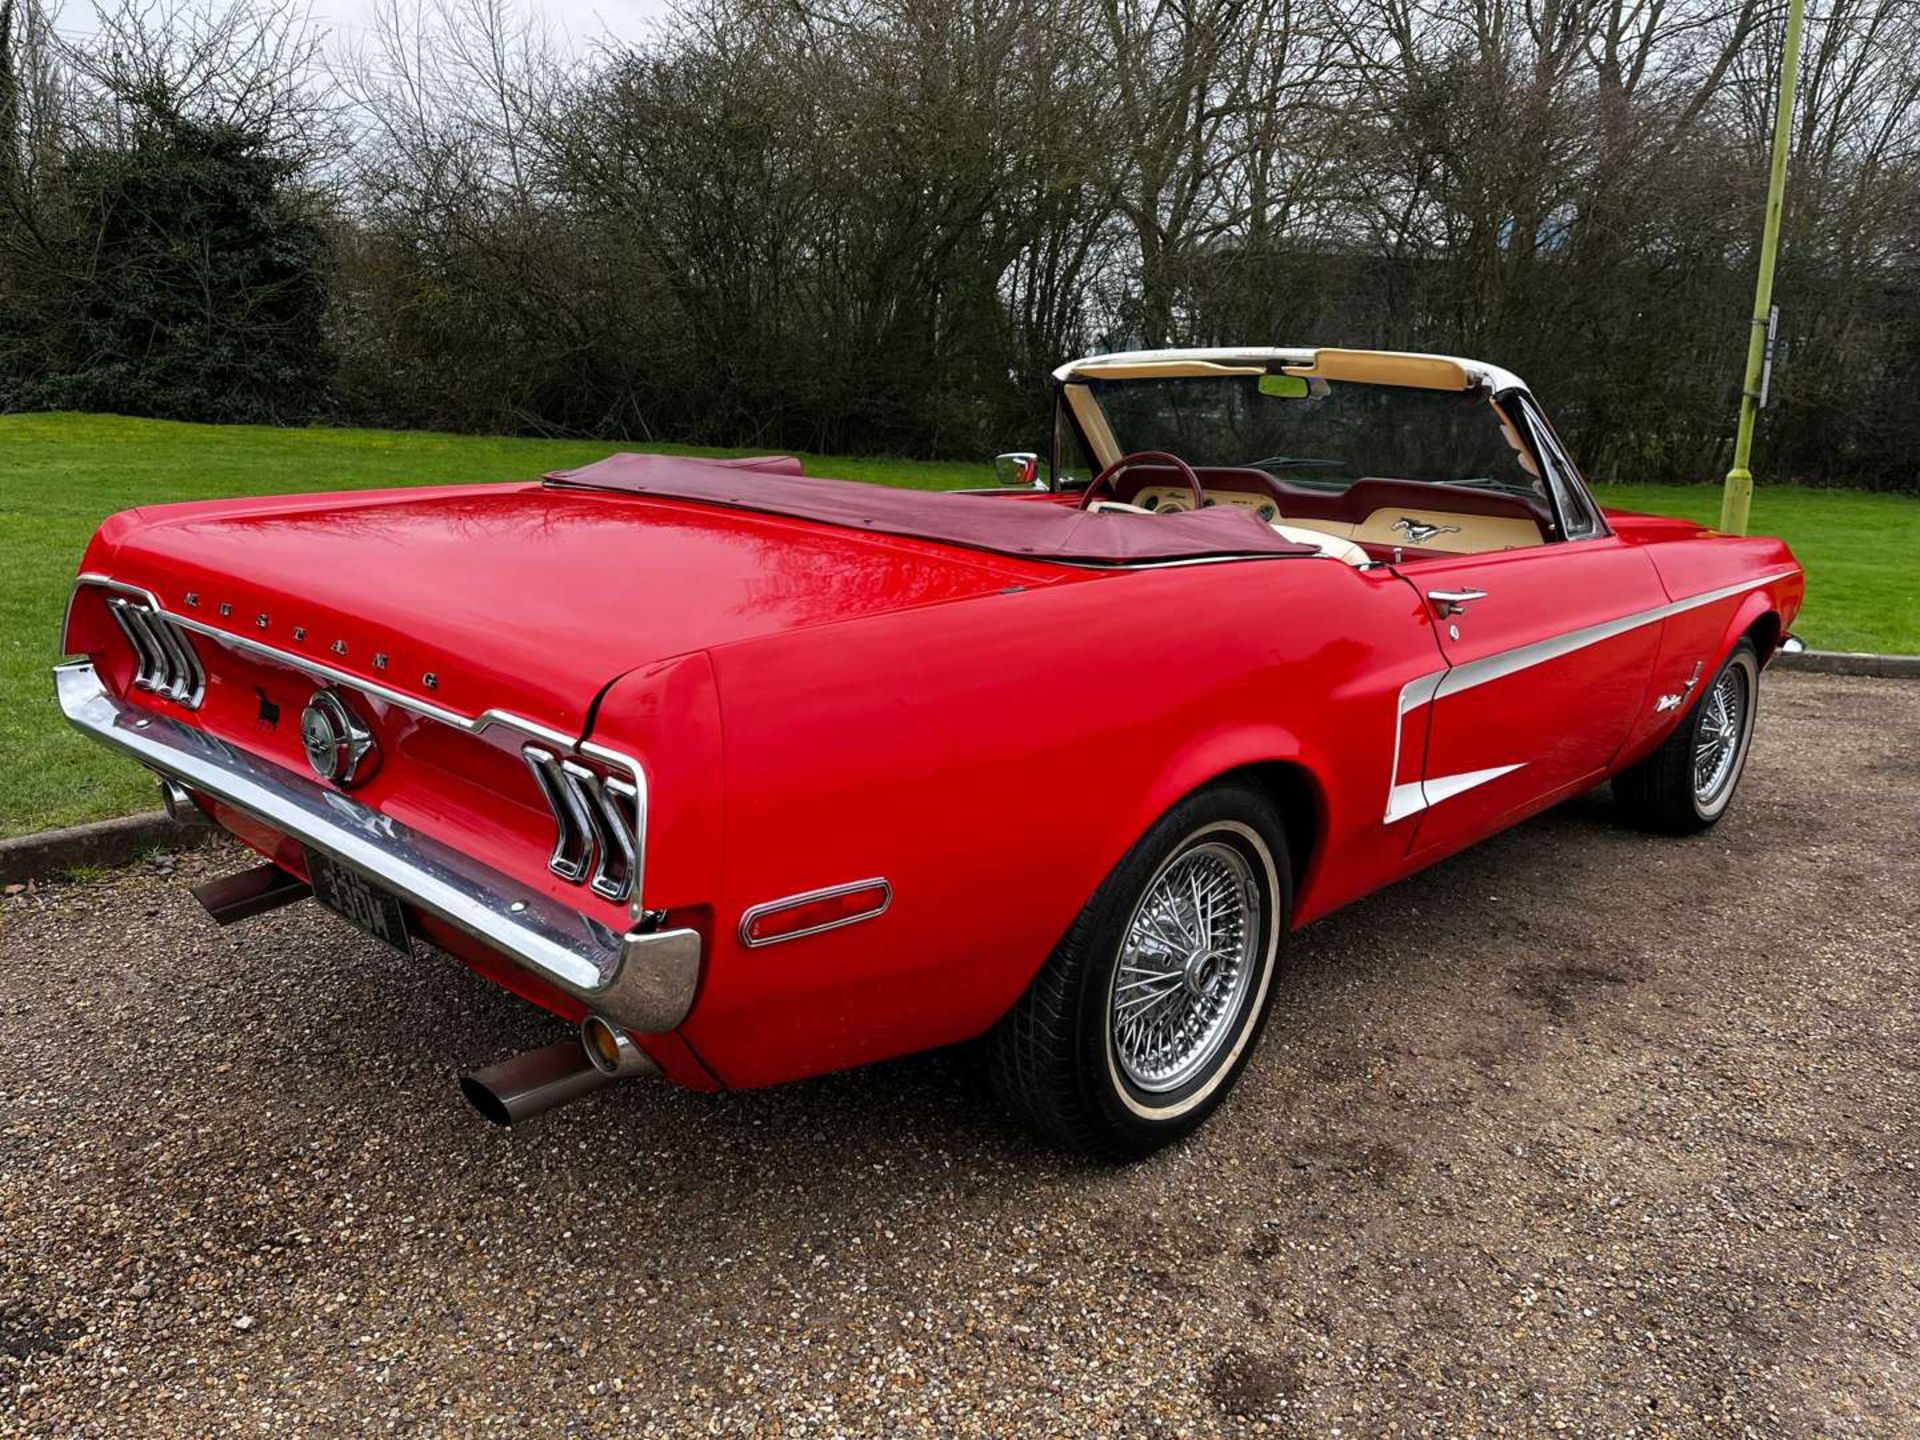 1968 FORD MUSTANG 4.7 V8 AUTO CONVERTIBLE LHD - Image 9 of 30